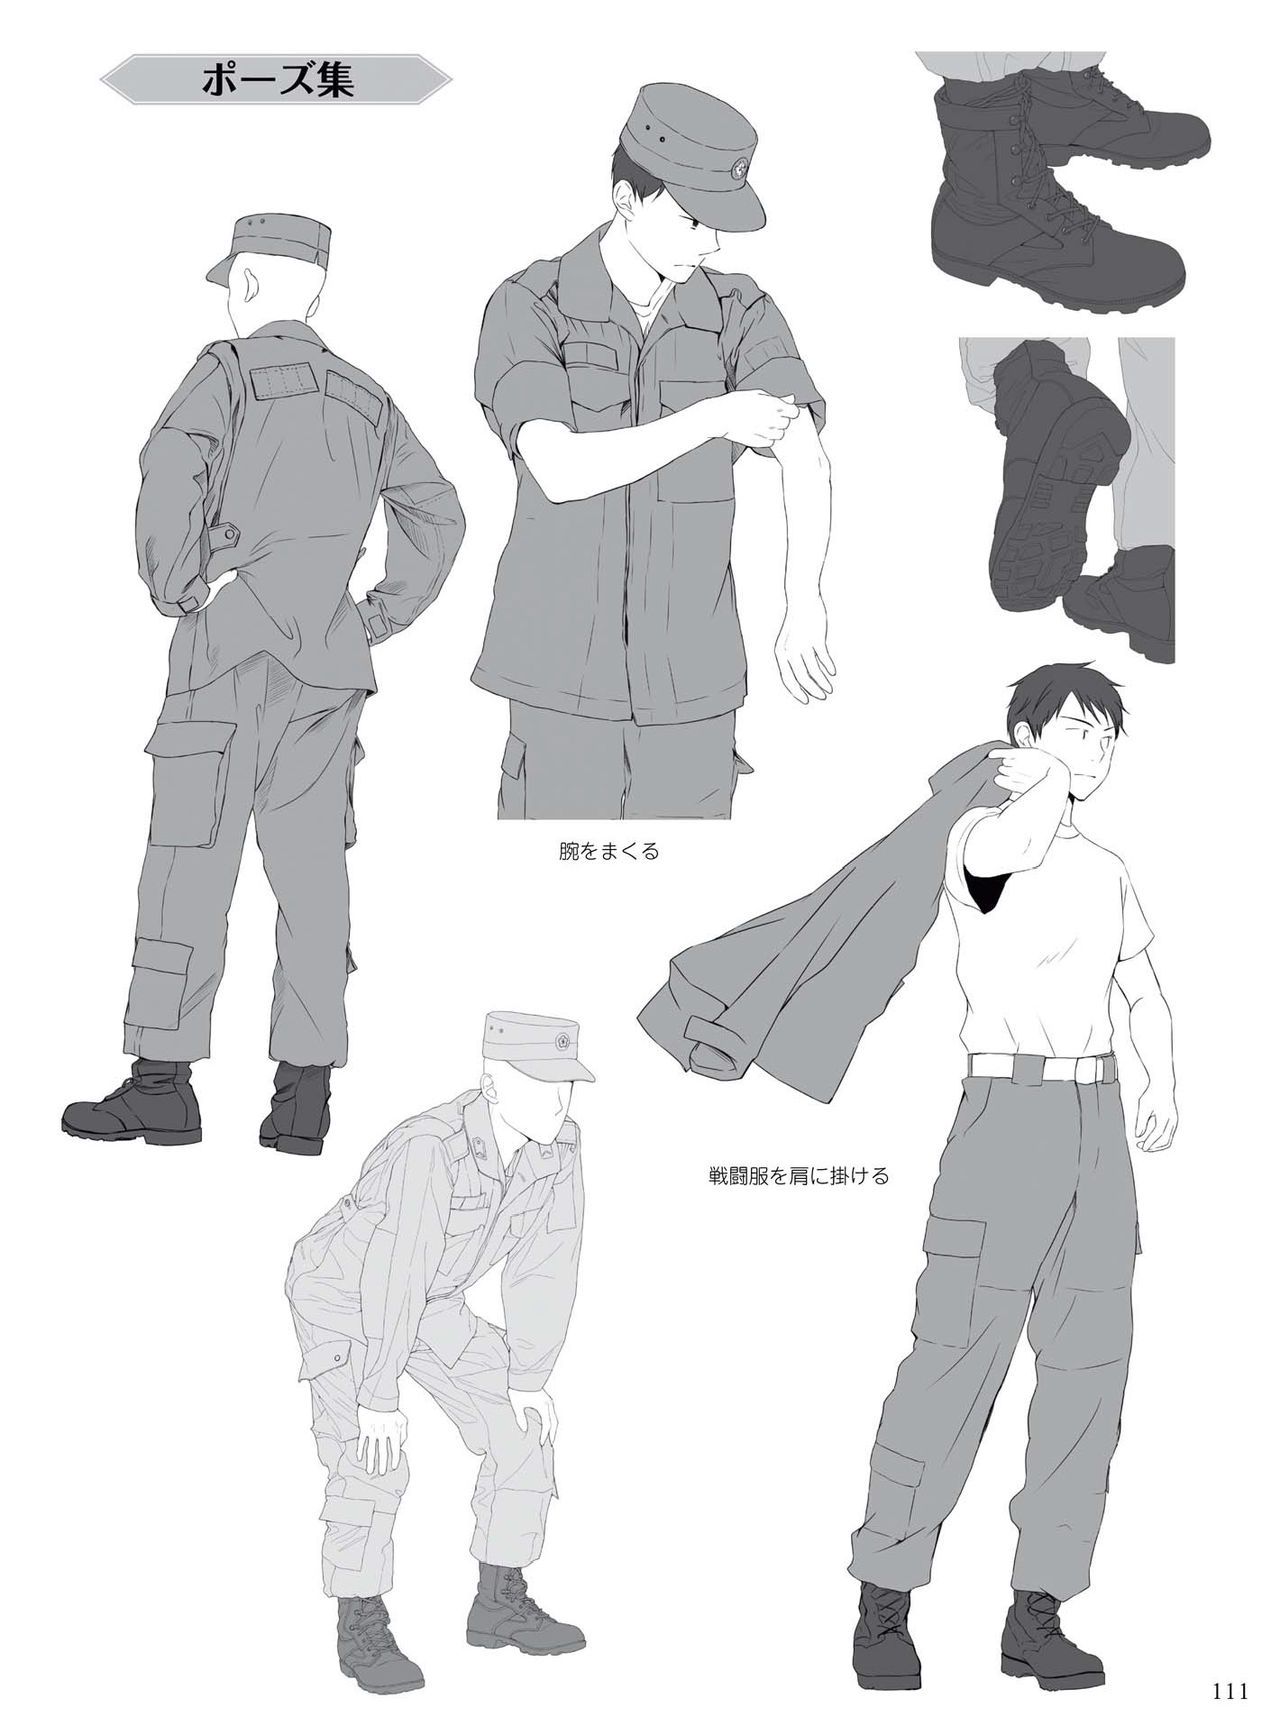 How to draw military uniforms and uniforms From Self-Defense Forces 軍服・制服の描き方 アメリカ軍・自衛隊の制服から戦闘服まで 114